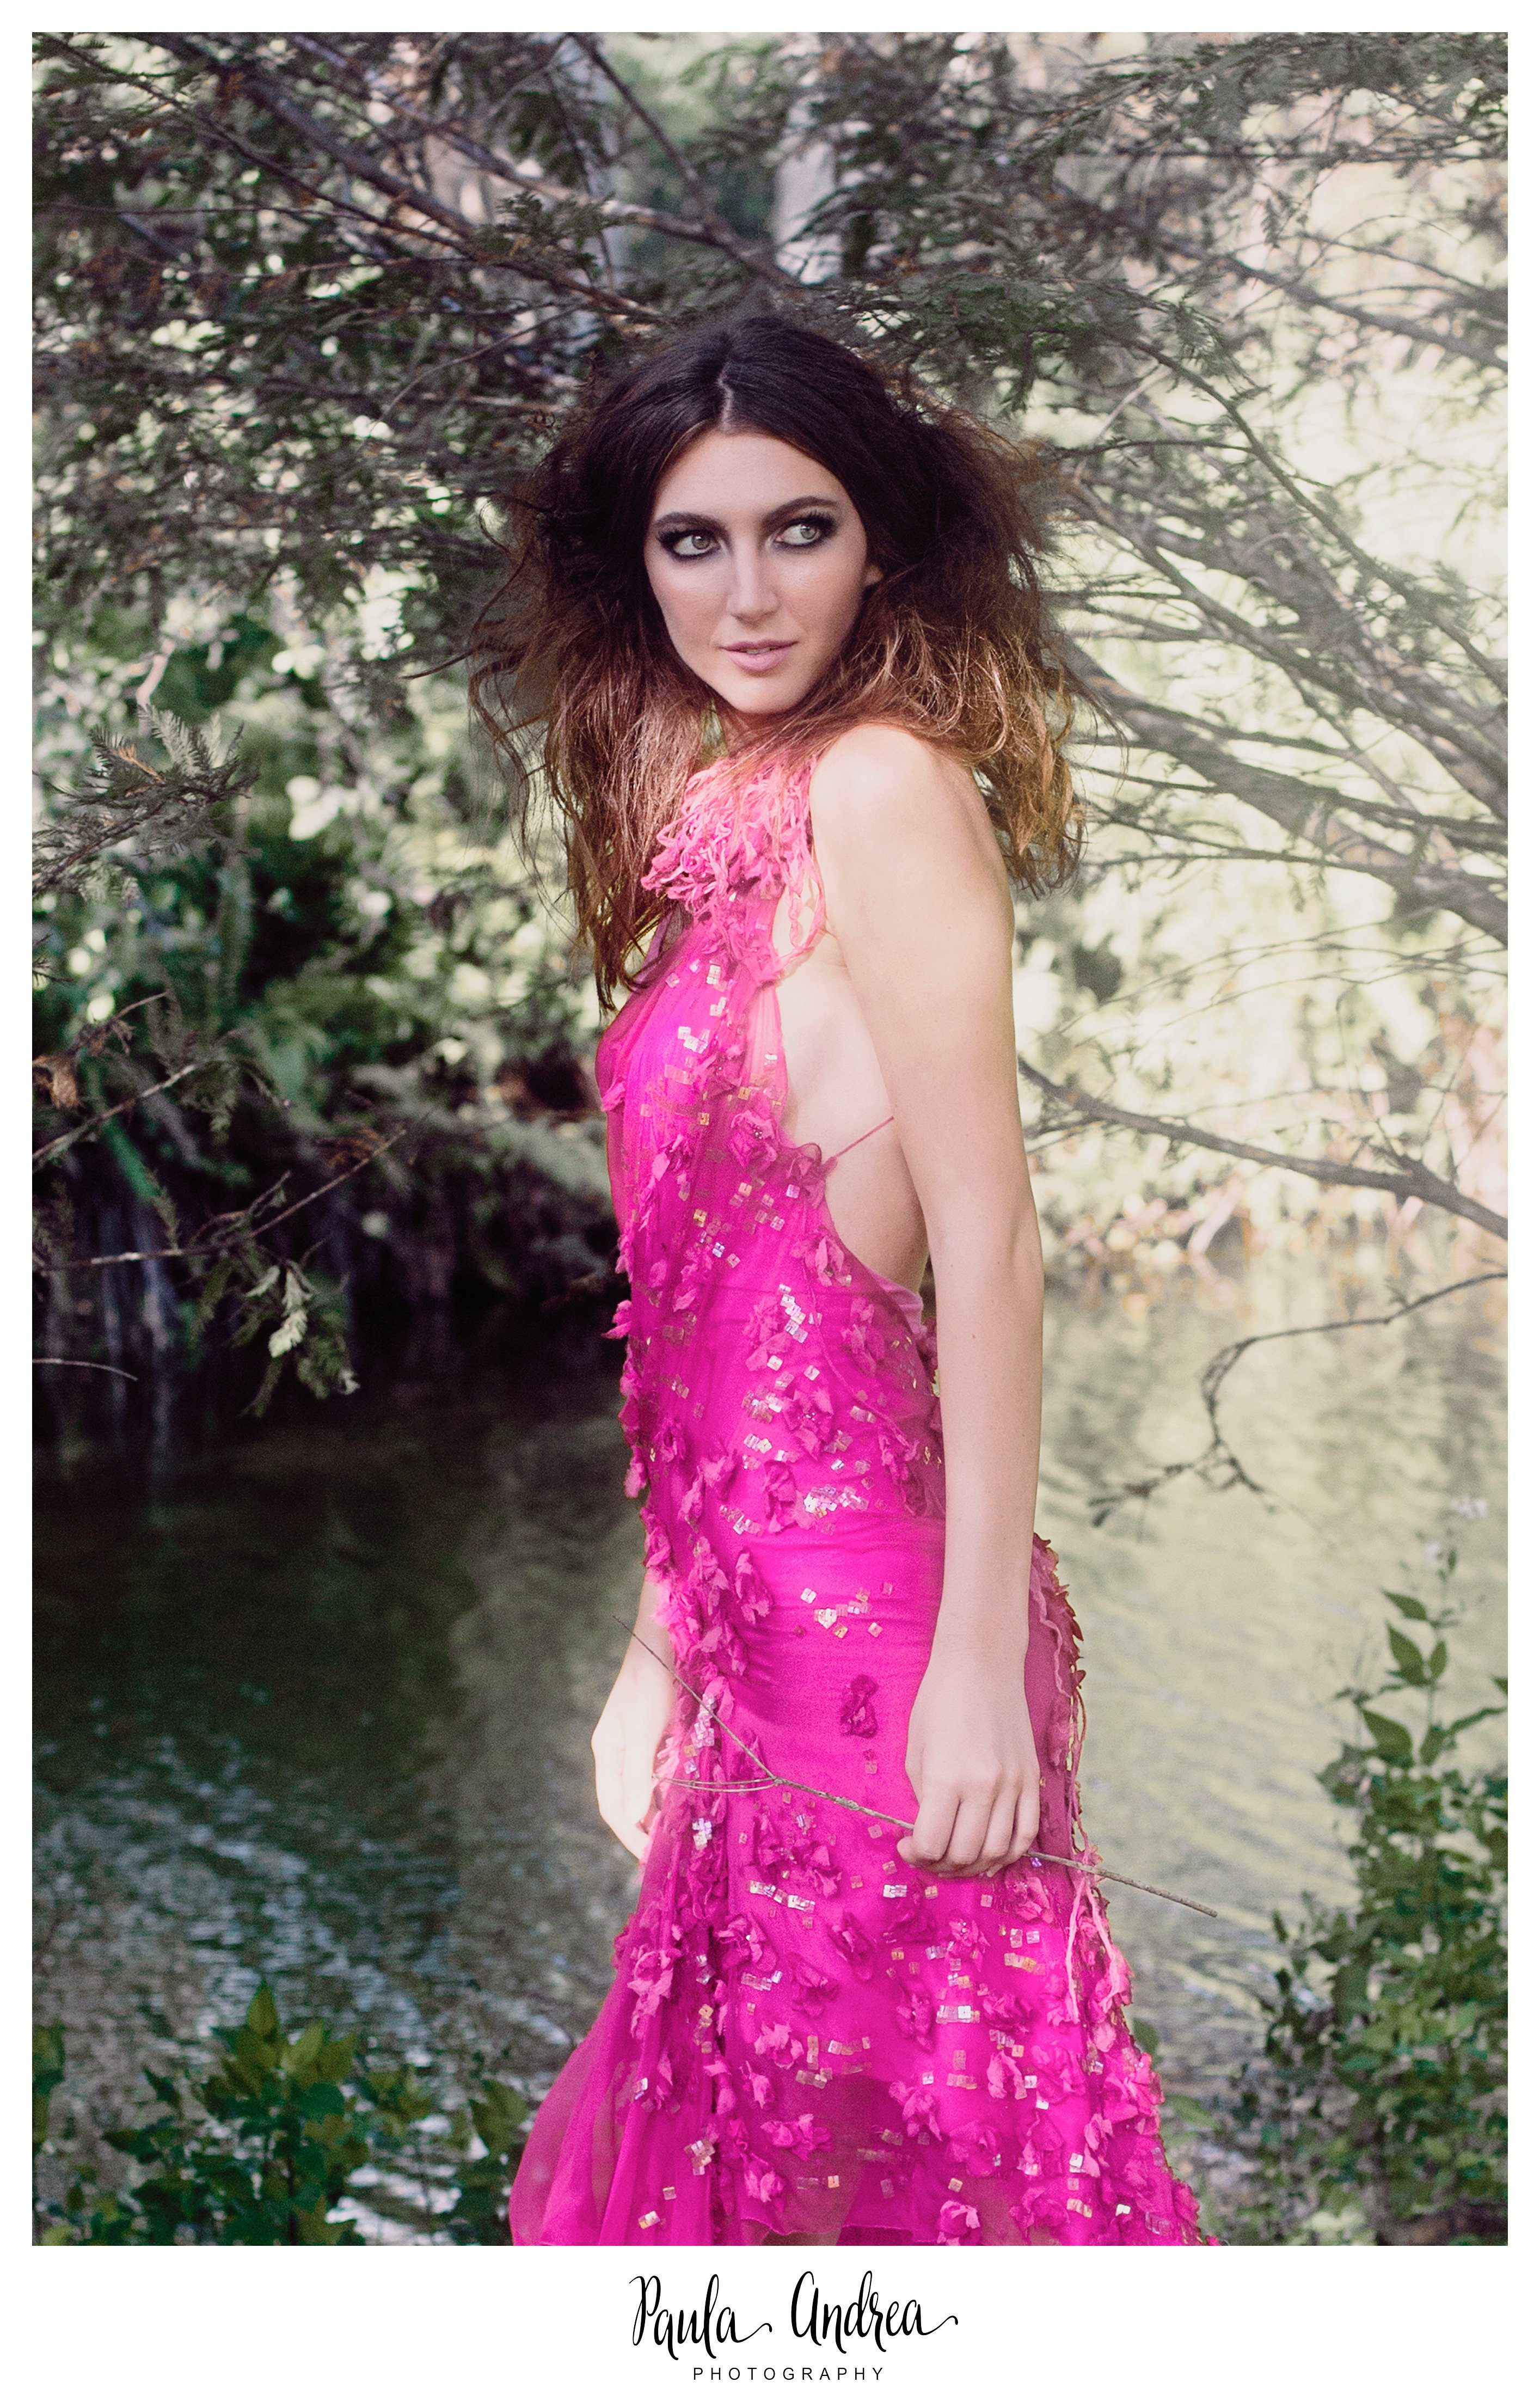 pink dress, forest, glamour shoot, nymph, glittery dress, metallic dress, forest fashion shoot, forest shoot, graceful, walking nymph, romantic pink dress, coral springs fashion shoot